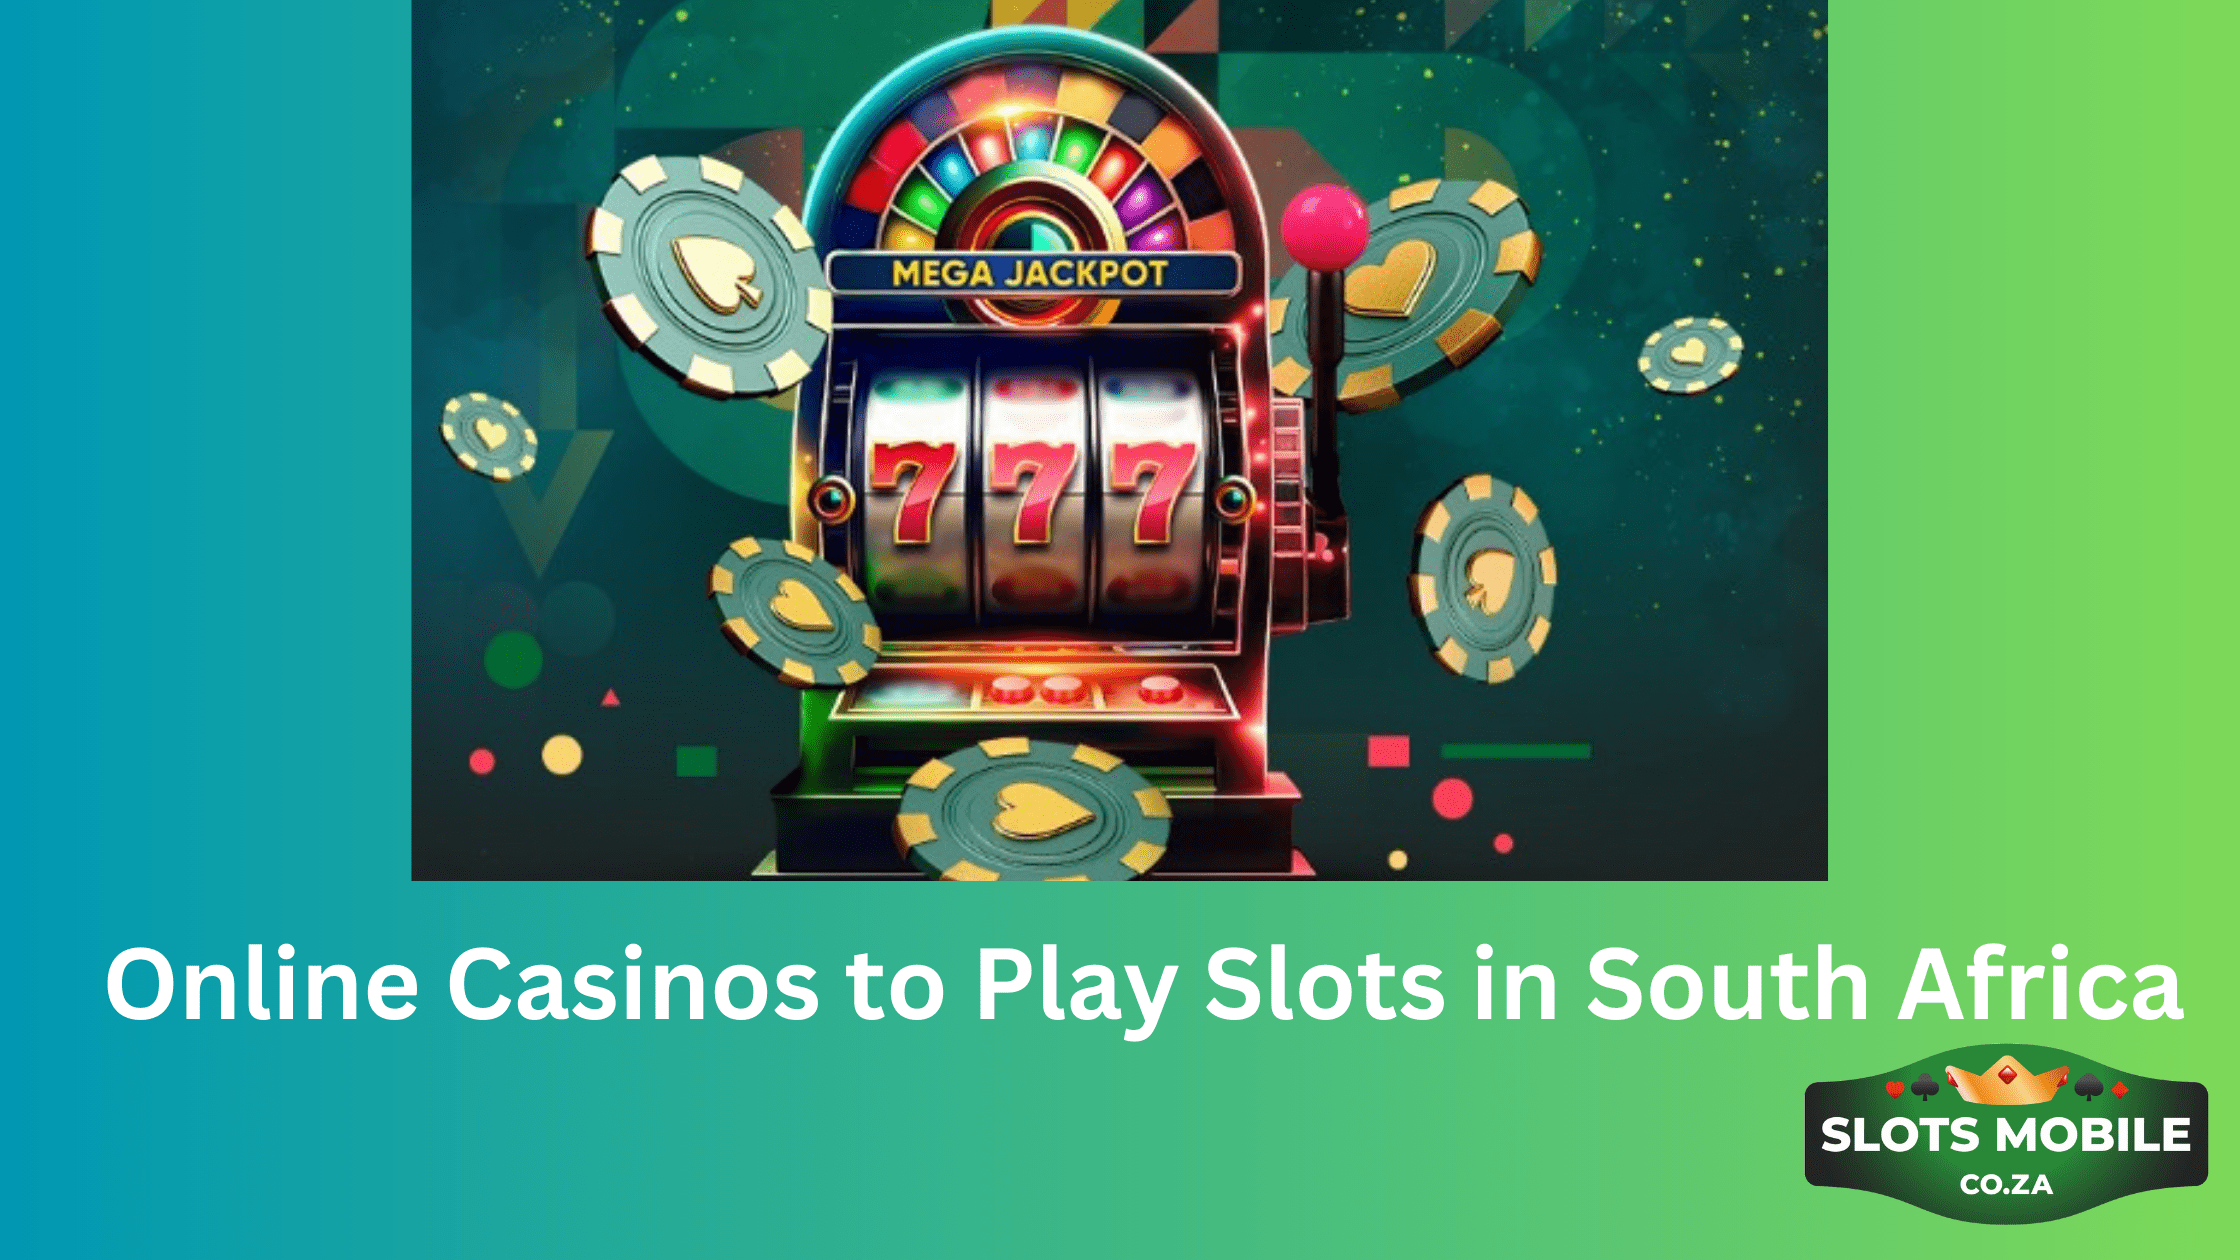 Online Casinos to Play Slots in South Africa